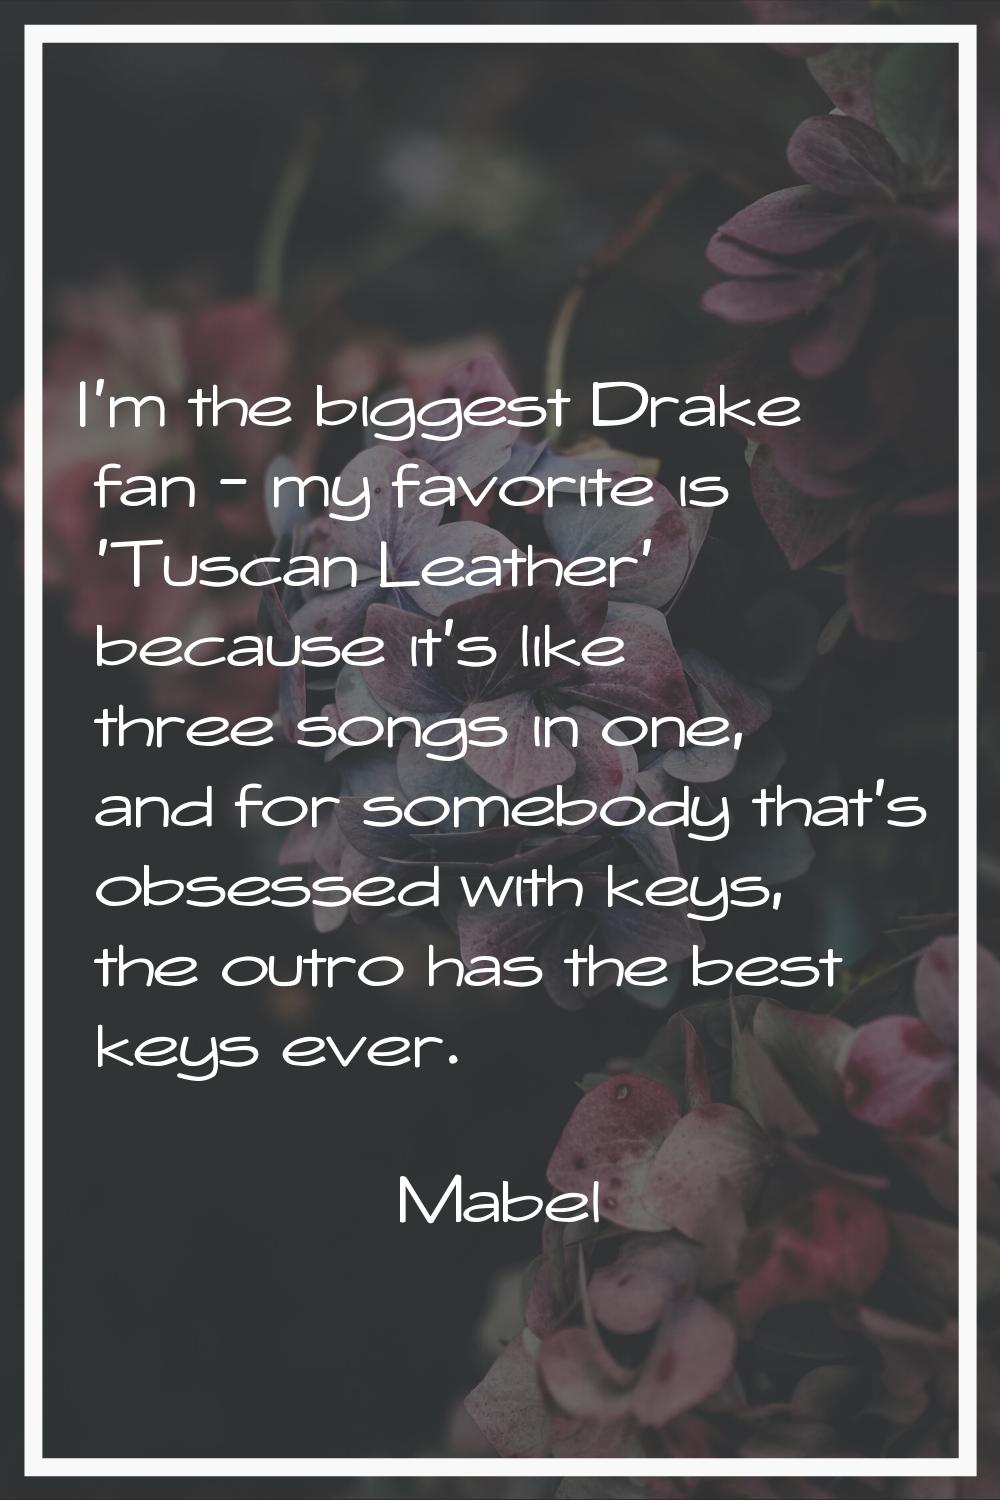 I'm the biggest Drake fan - my favorite is 'Tuscan Leather' because it's like three songs in one, a